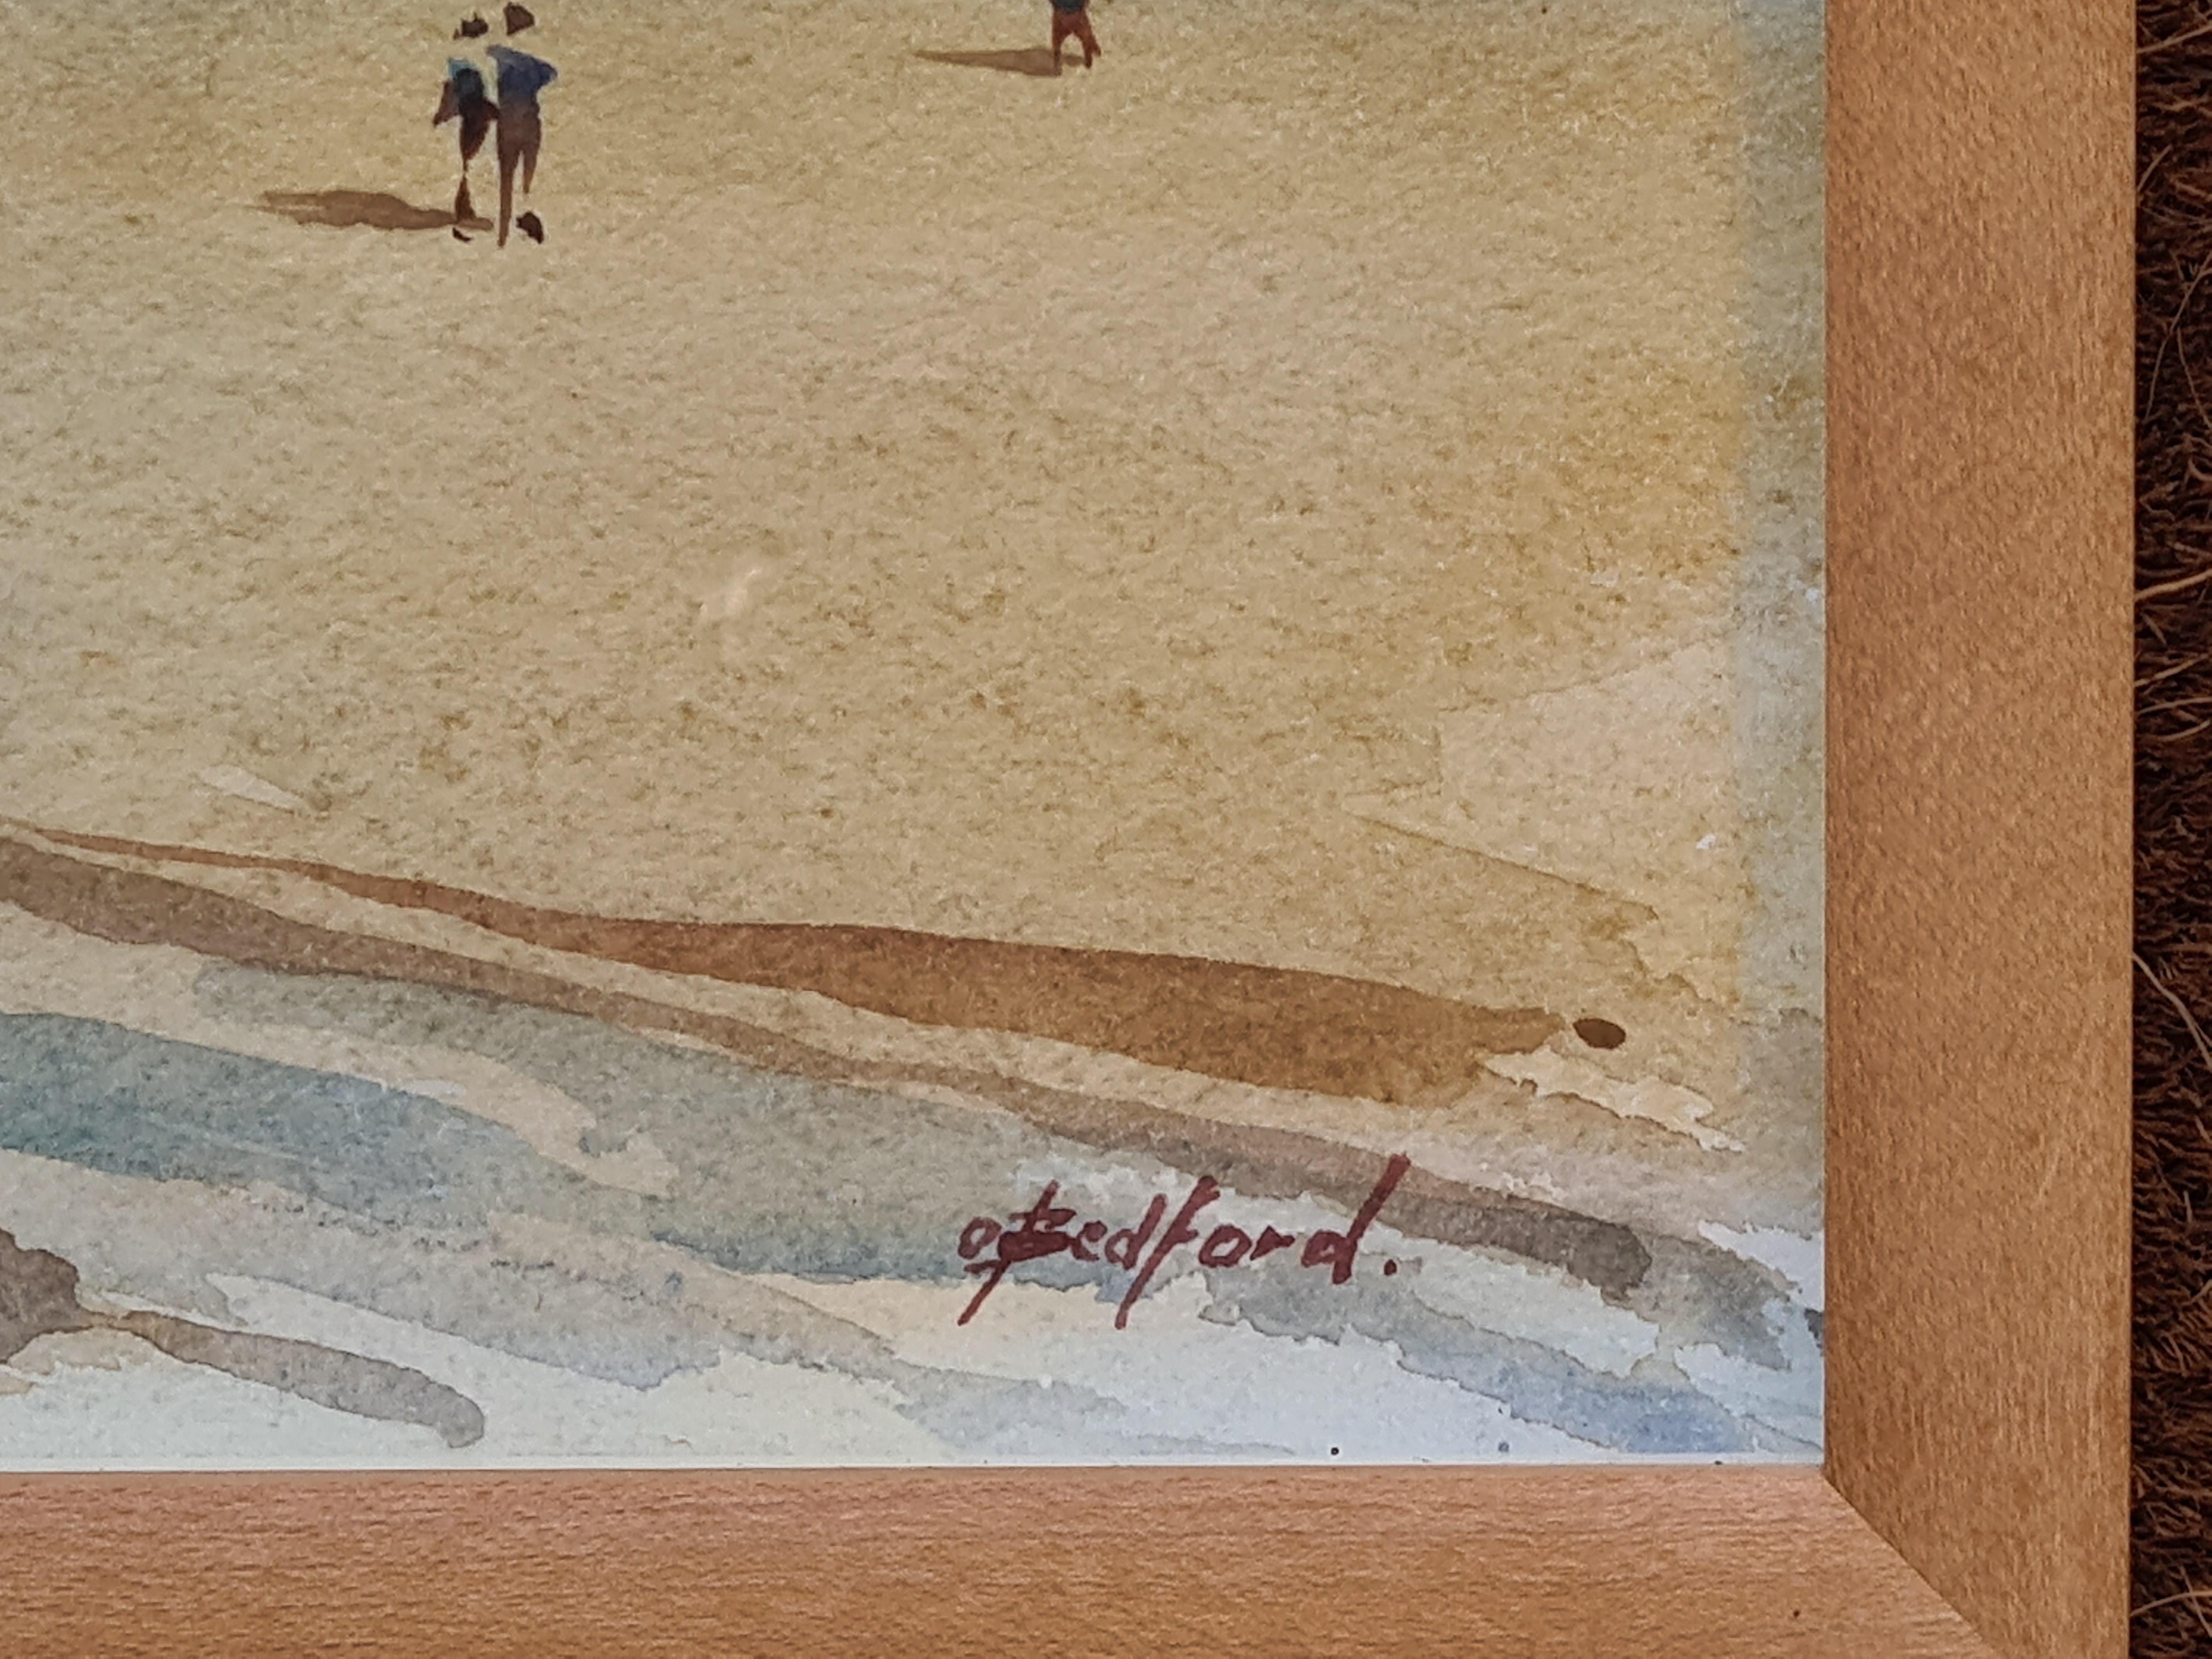 Watercolour on paper of a Cornish beach scene by Oliver Bedford. Signed bottom right. Titled and located on a trade label for The Rowley Gallery, Kensington, London. Presented in custom wood frame under glass.

A charming Cornish beach scene, people